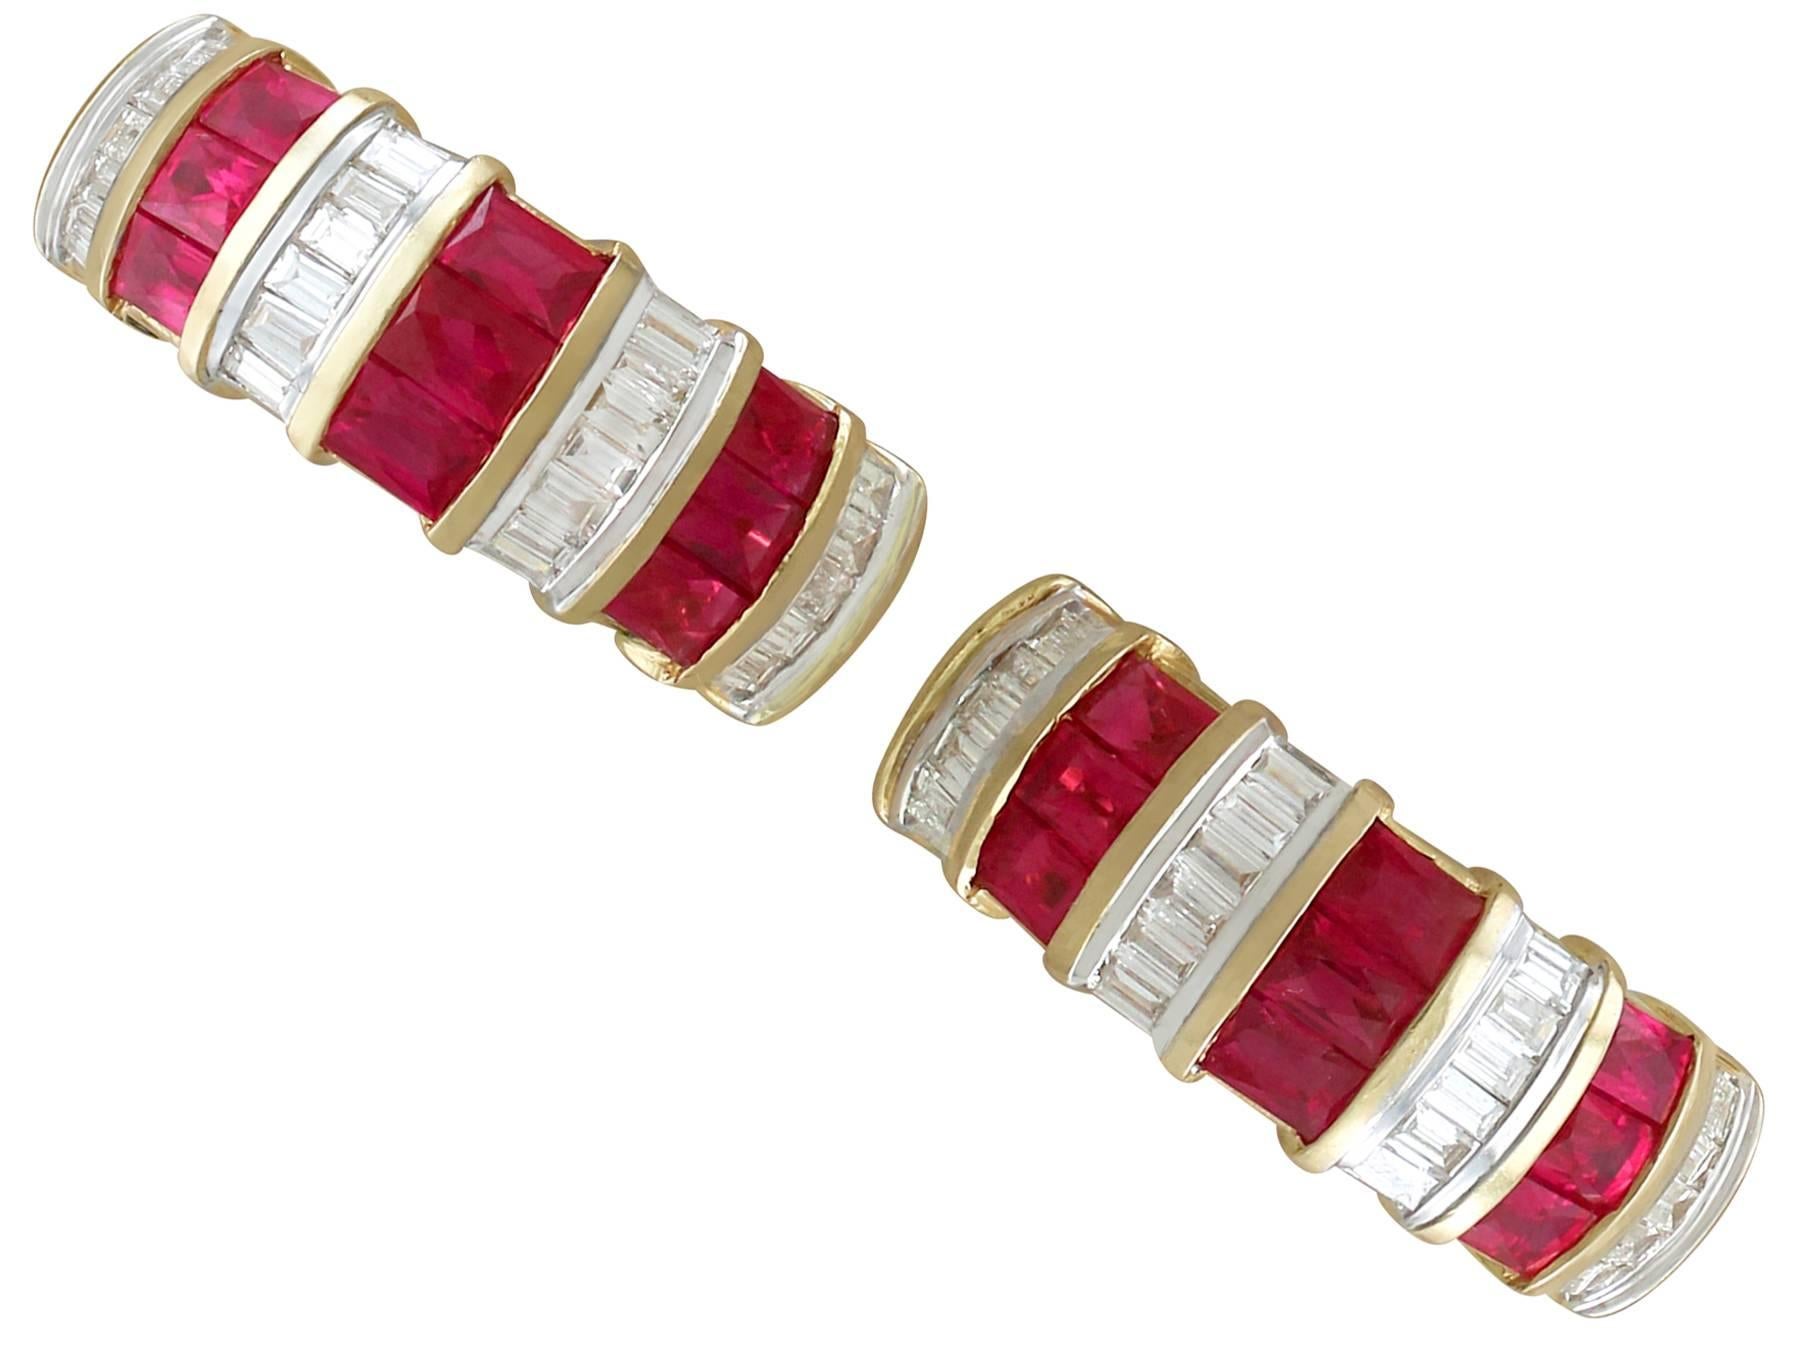 A stunning pair of contemporary European 1.80 carat ruby and 1.05 carat diamond, 18 karat yellow gold drop earrings; part of our diverse gemstone jewelry collections

These exceptional, fine and impressive contemporary ruby and diamond earrings have